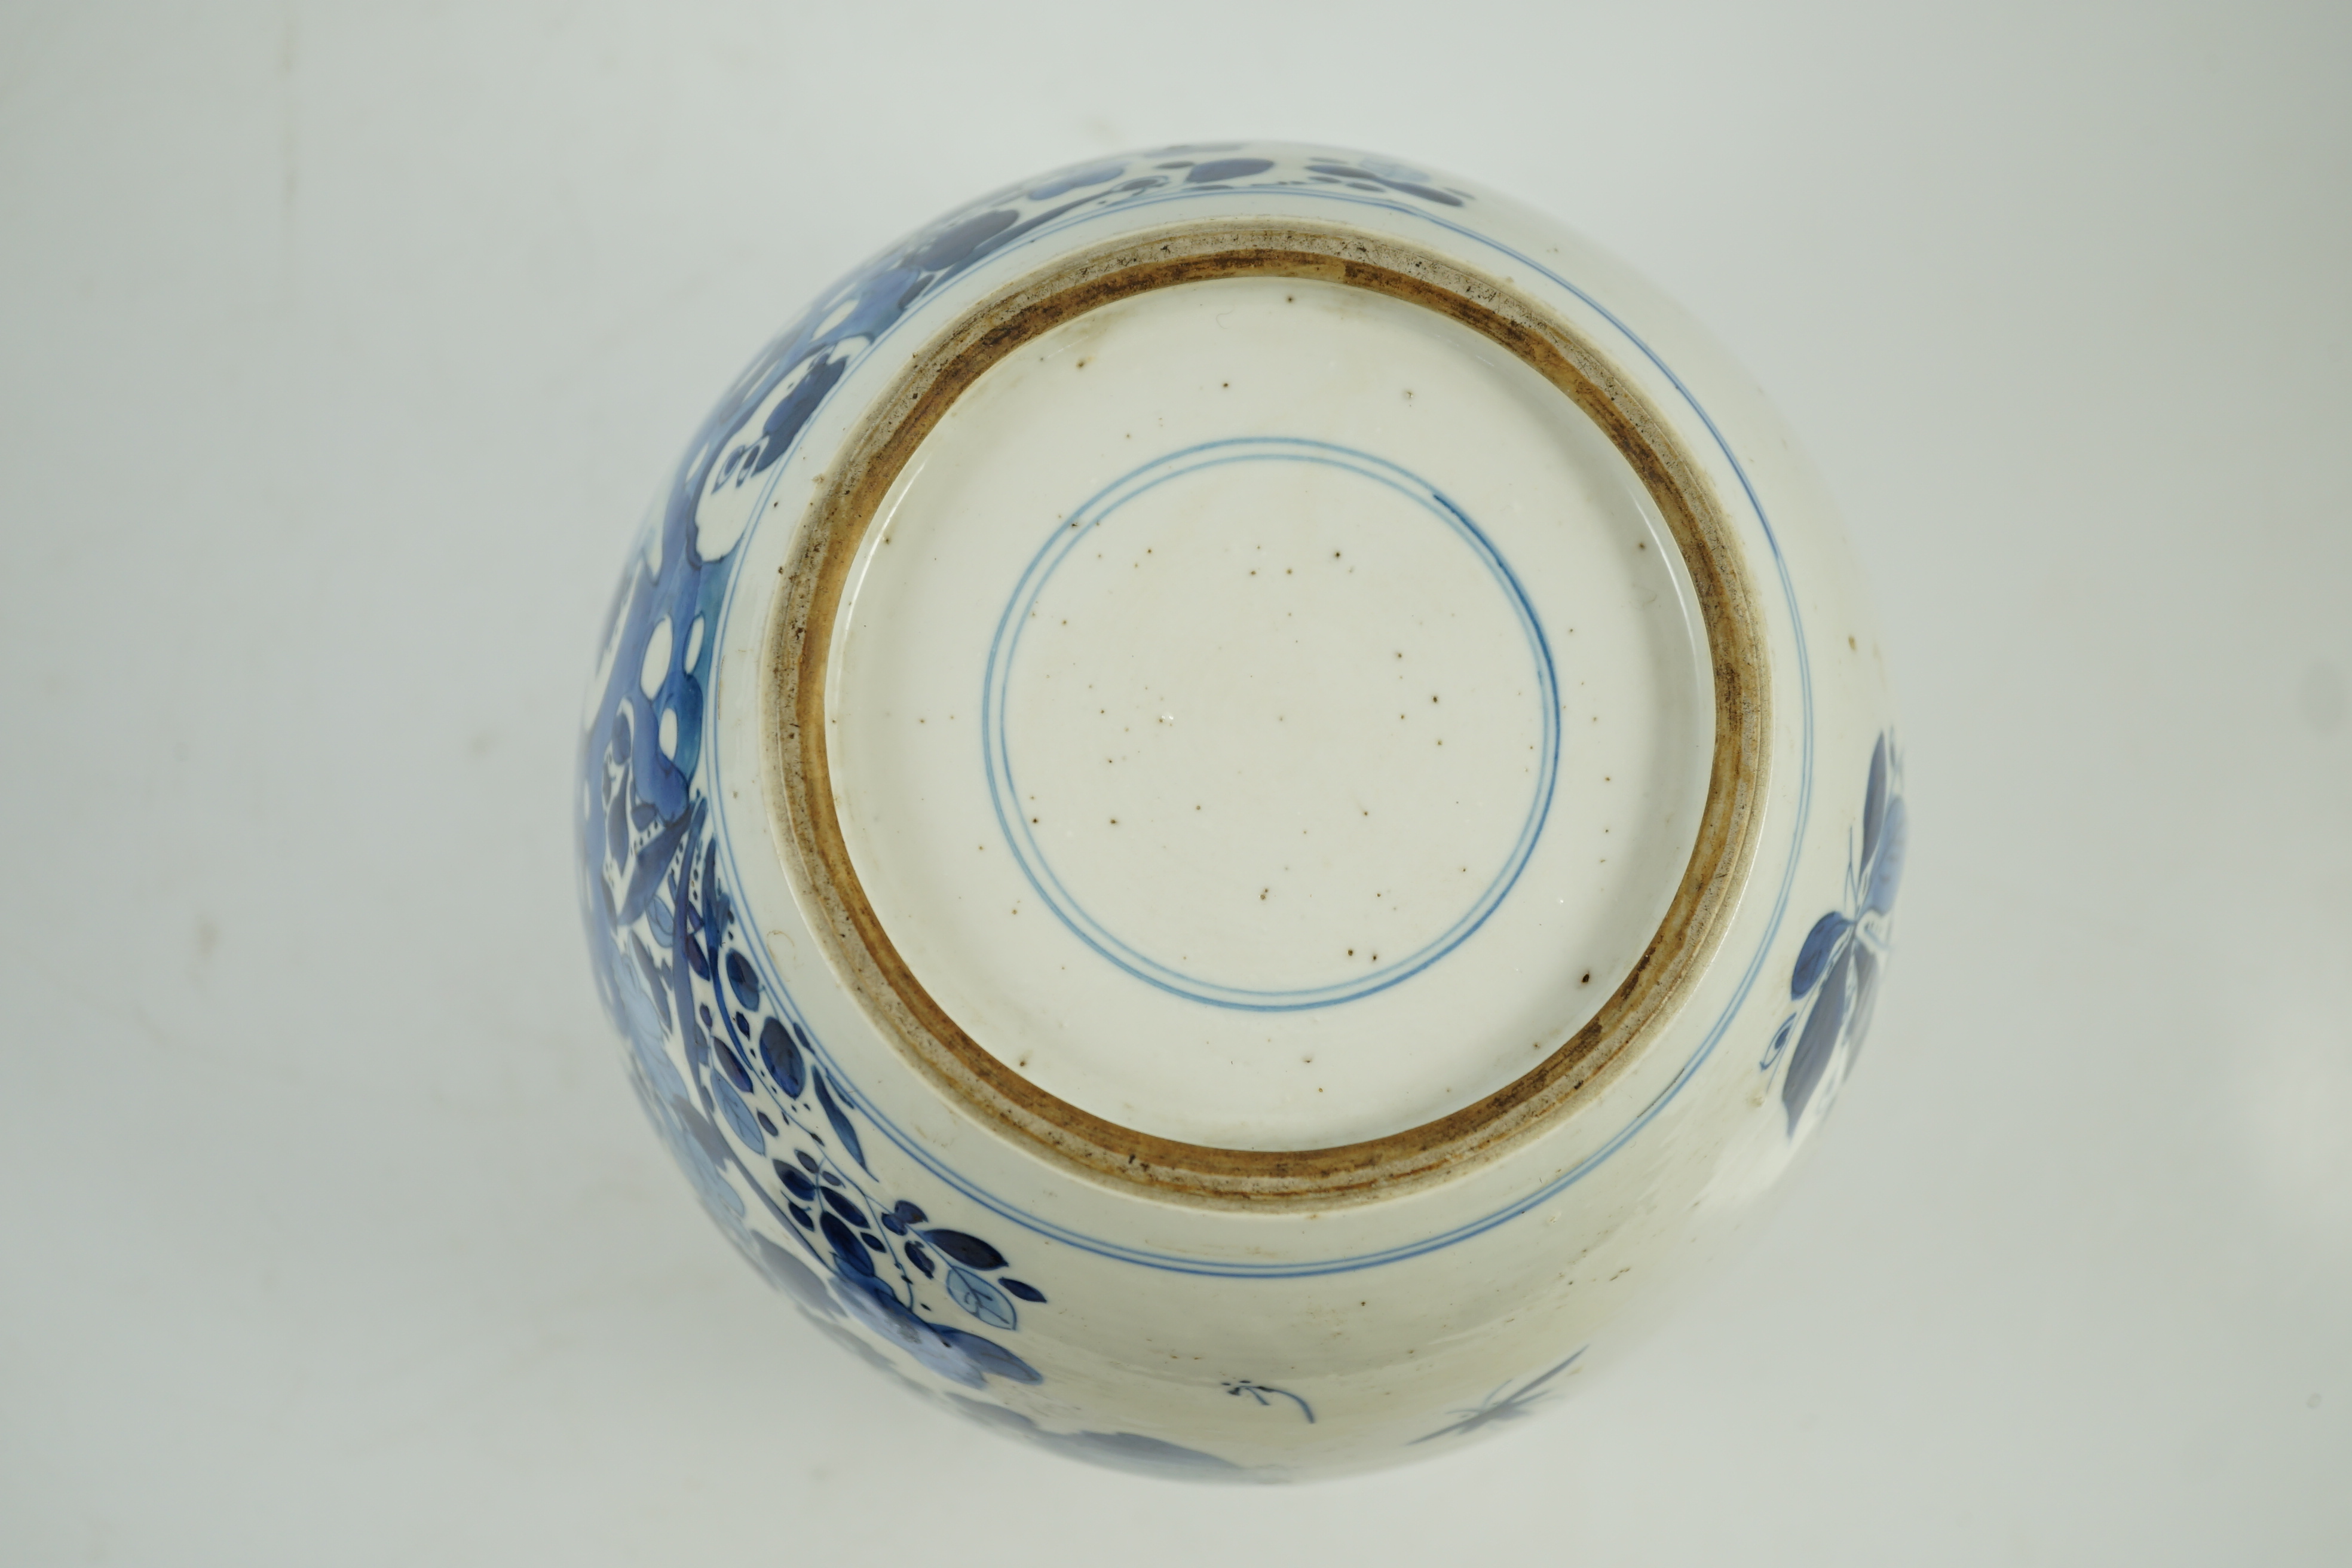 A Chinese blue and white ‘birds and rockwork’ ovoid jar, Kangxi period